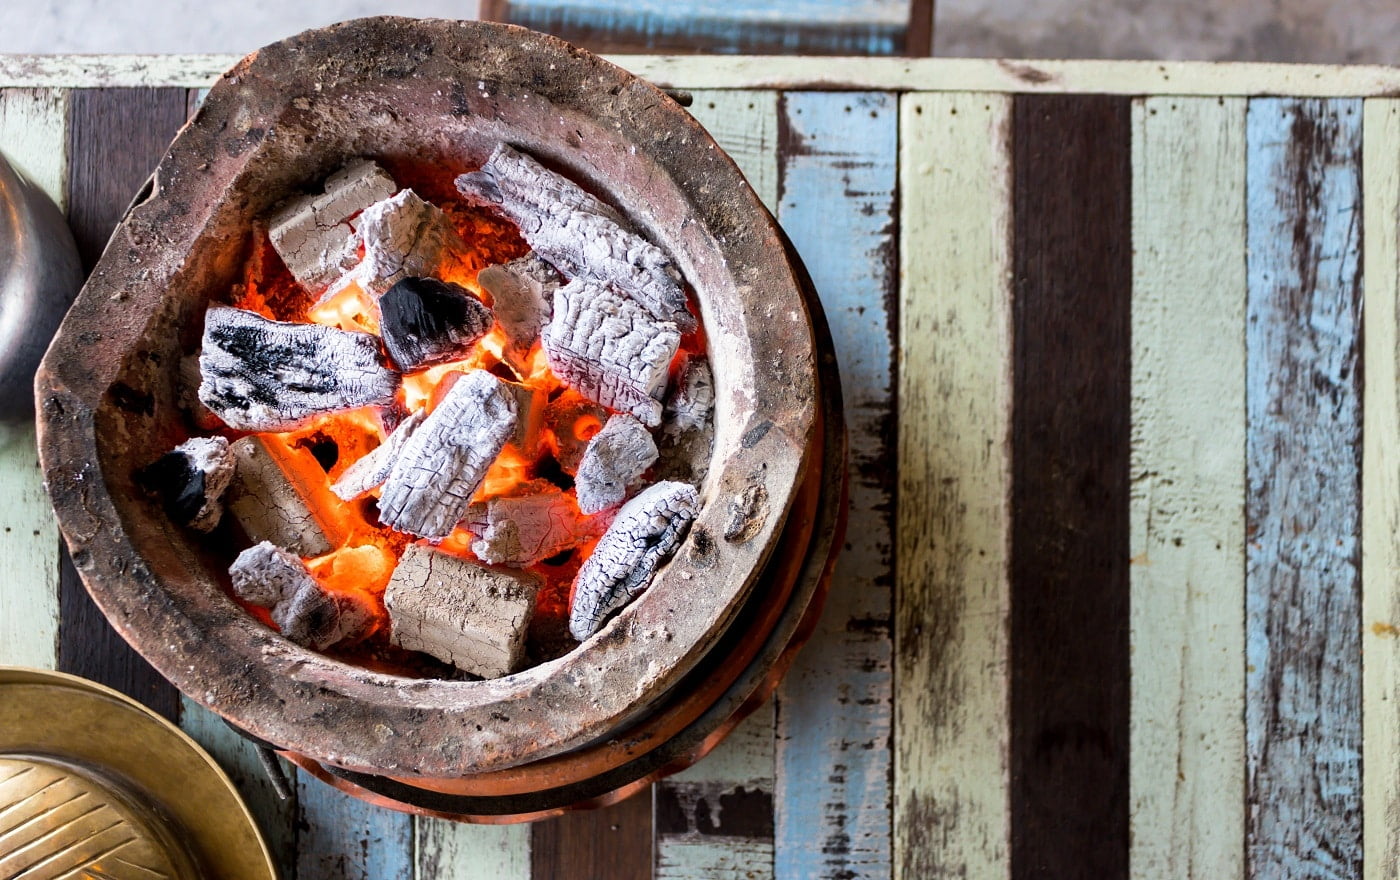 Burning charcoal with flame in the baked clay stove on the wooden table